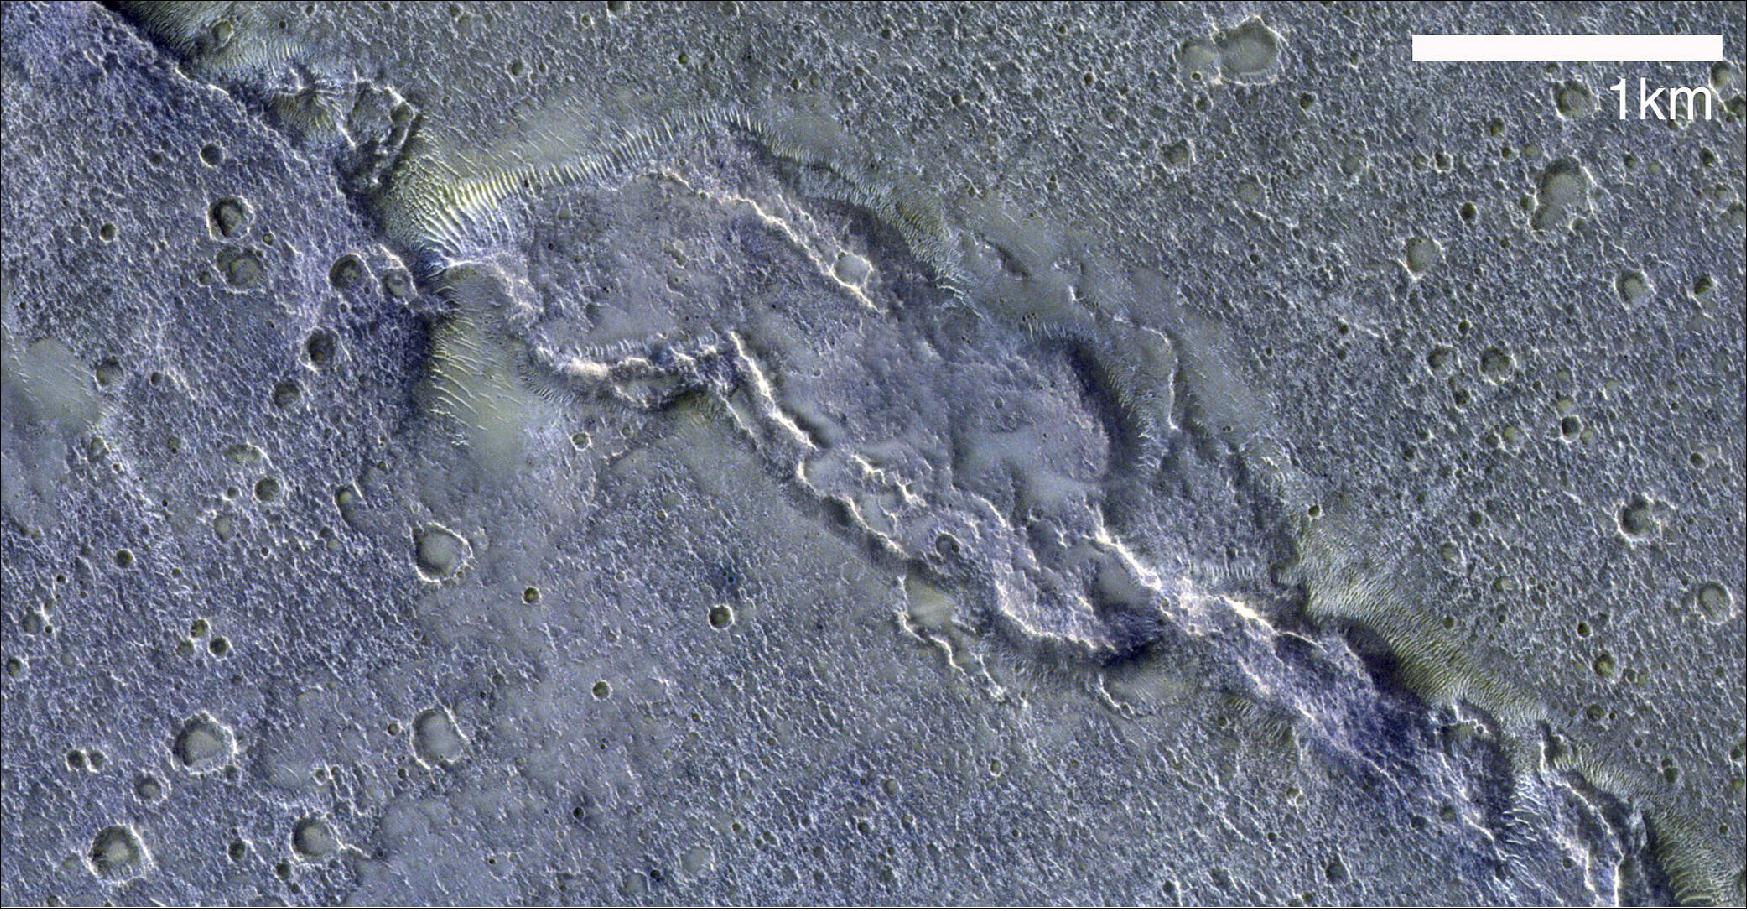 Figure 39: The image, taken on 13 December 2020, features Solis Dorsum, a segment of a prominent wrinkle ridge system in a vast volcanic plateau, known as Tharsis. Wrinkle ridges are tectonic features that form in layered basalt lavas due to loading and flexure of the planet's crust and upper mantle. These tectonic stresses are caused by the planet's interior cooling and subsequent contraction (image credit: ESA/Roscosmos/CaSSIS, CC BY-SA 3.0 IGO)